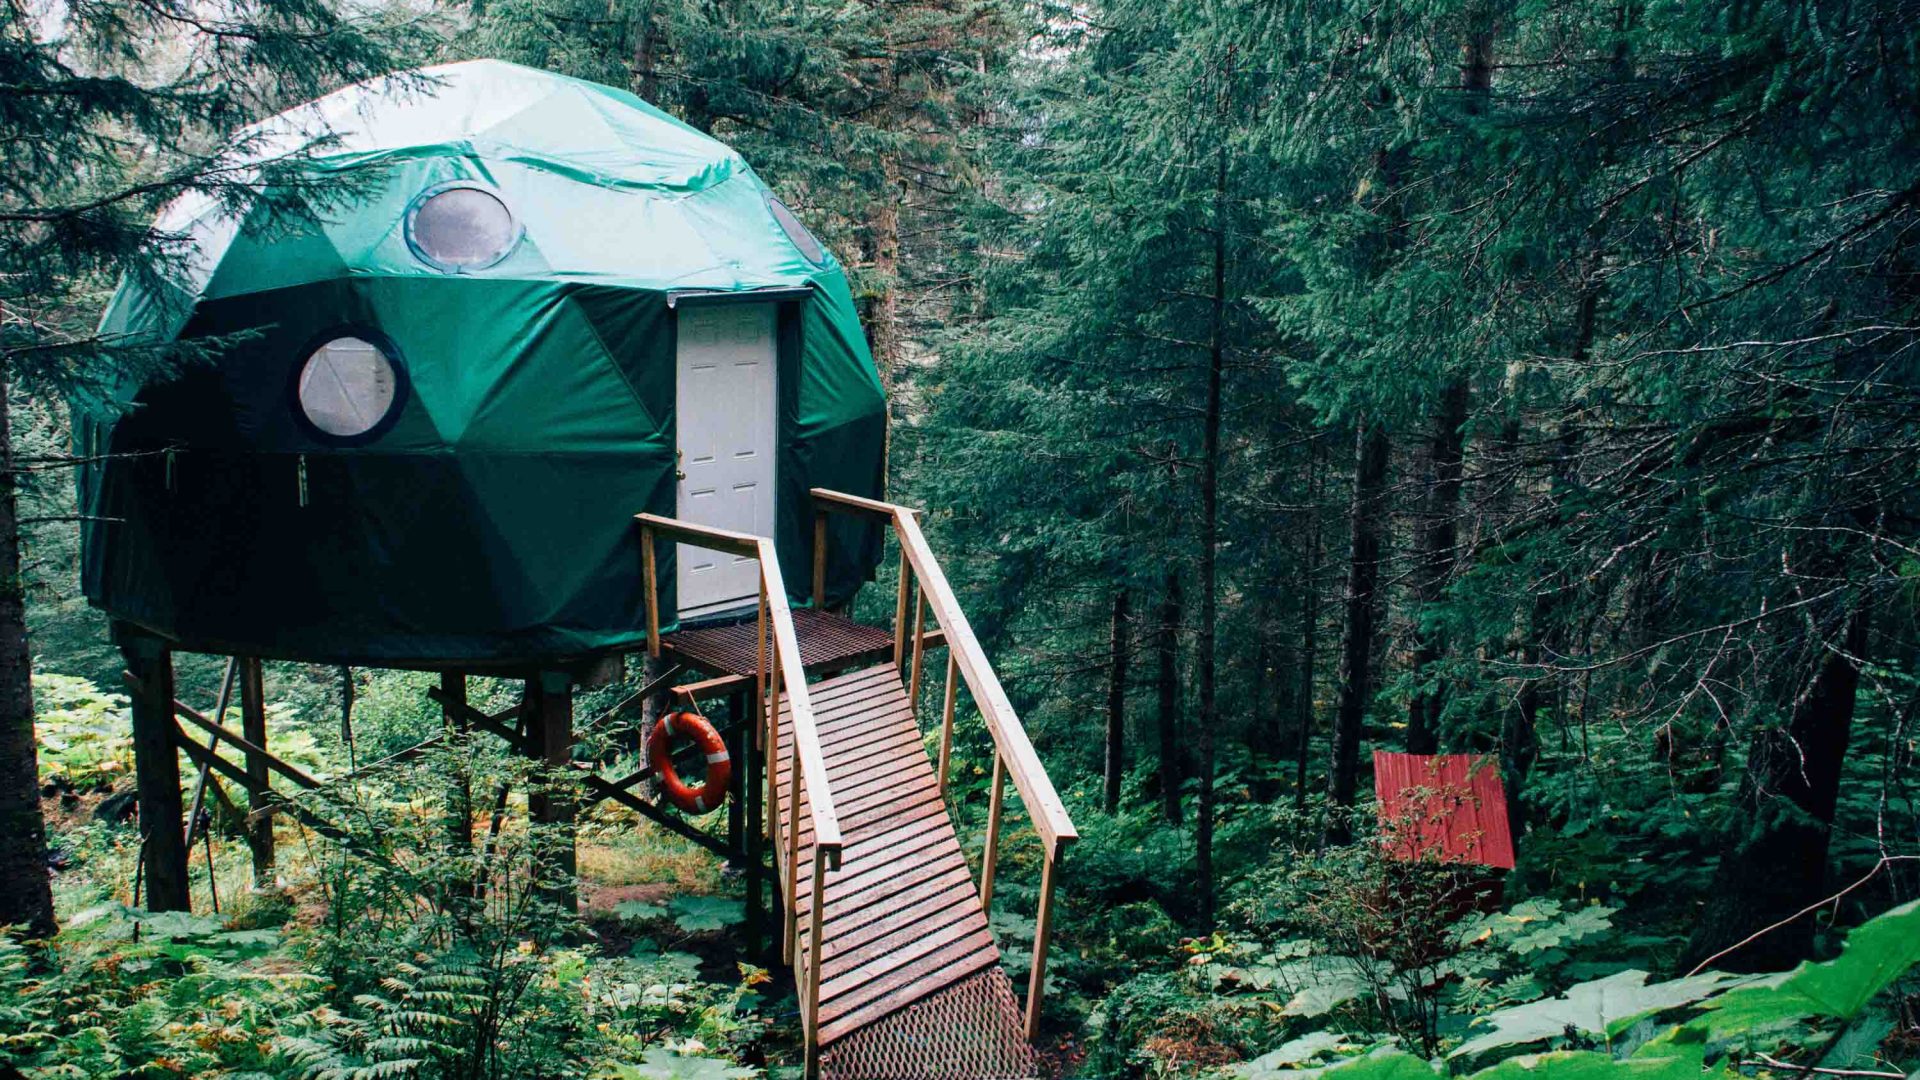 A green yurt in a forest setting.